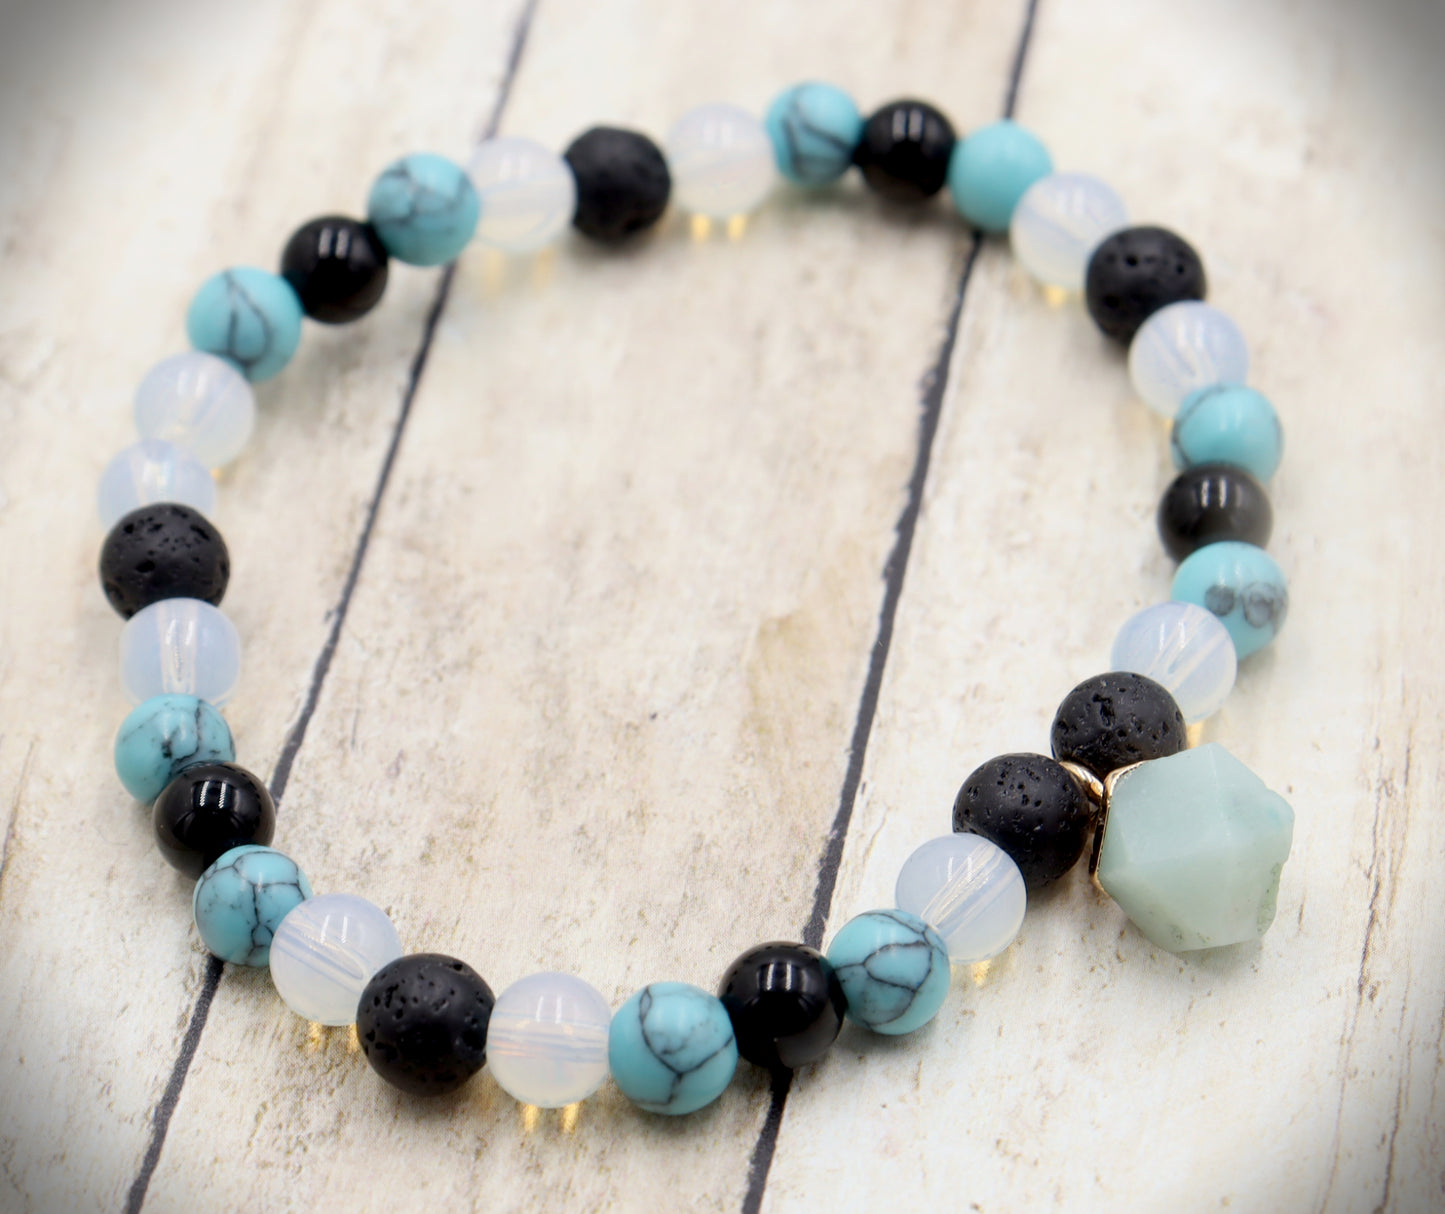 Head Over the Moon for Turquoise Blue and Black Lava Rock Golden Geometric Charm Bracelet